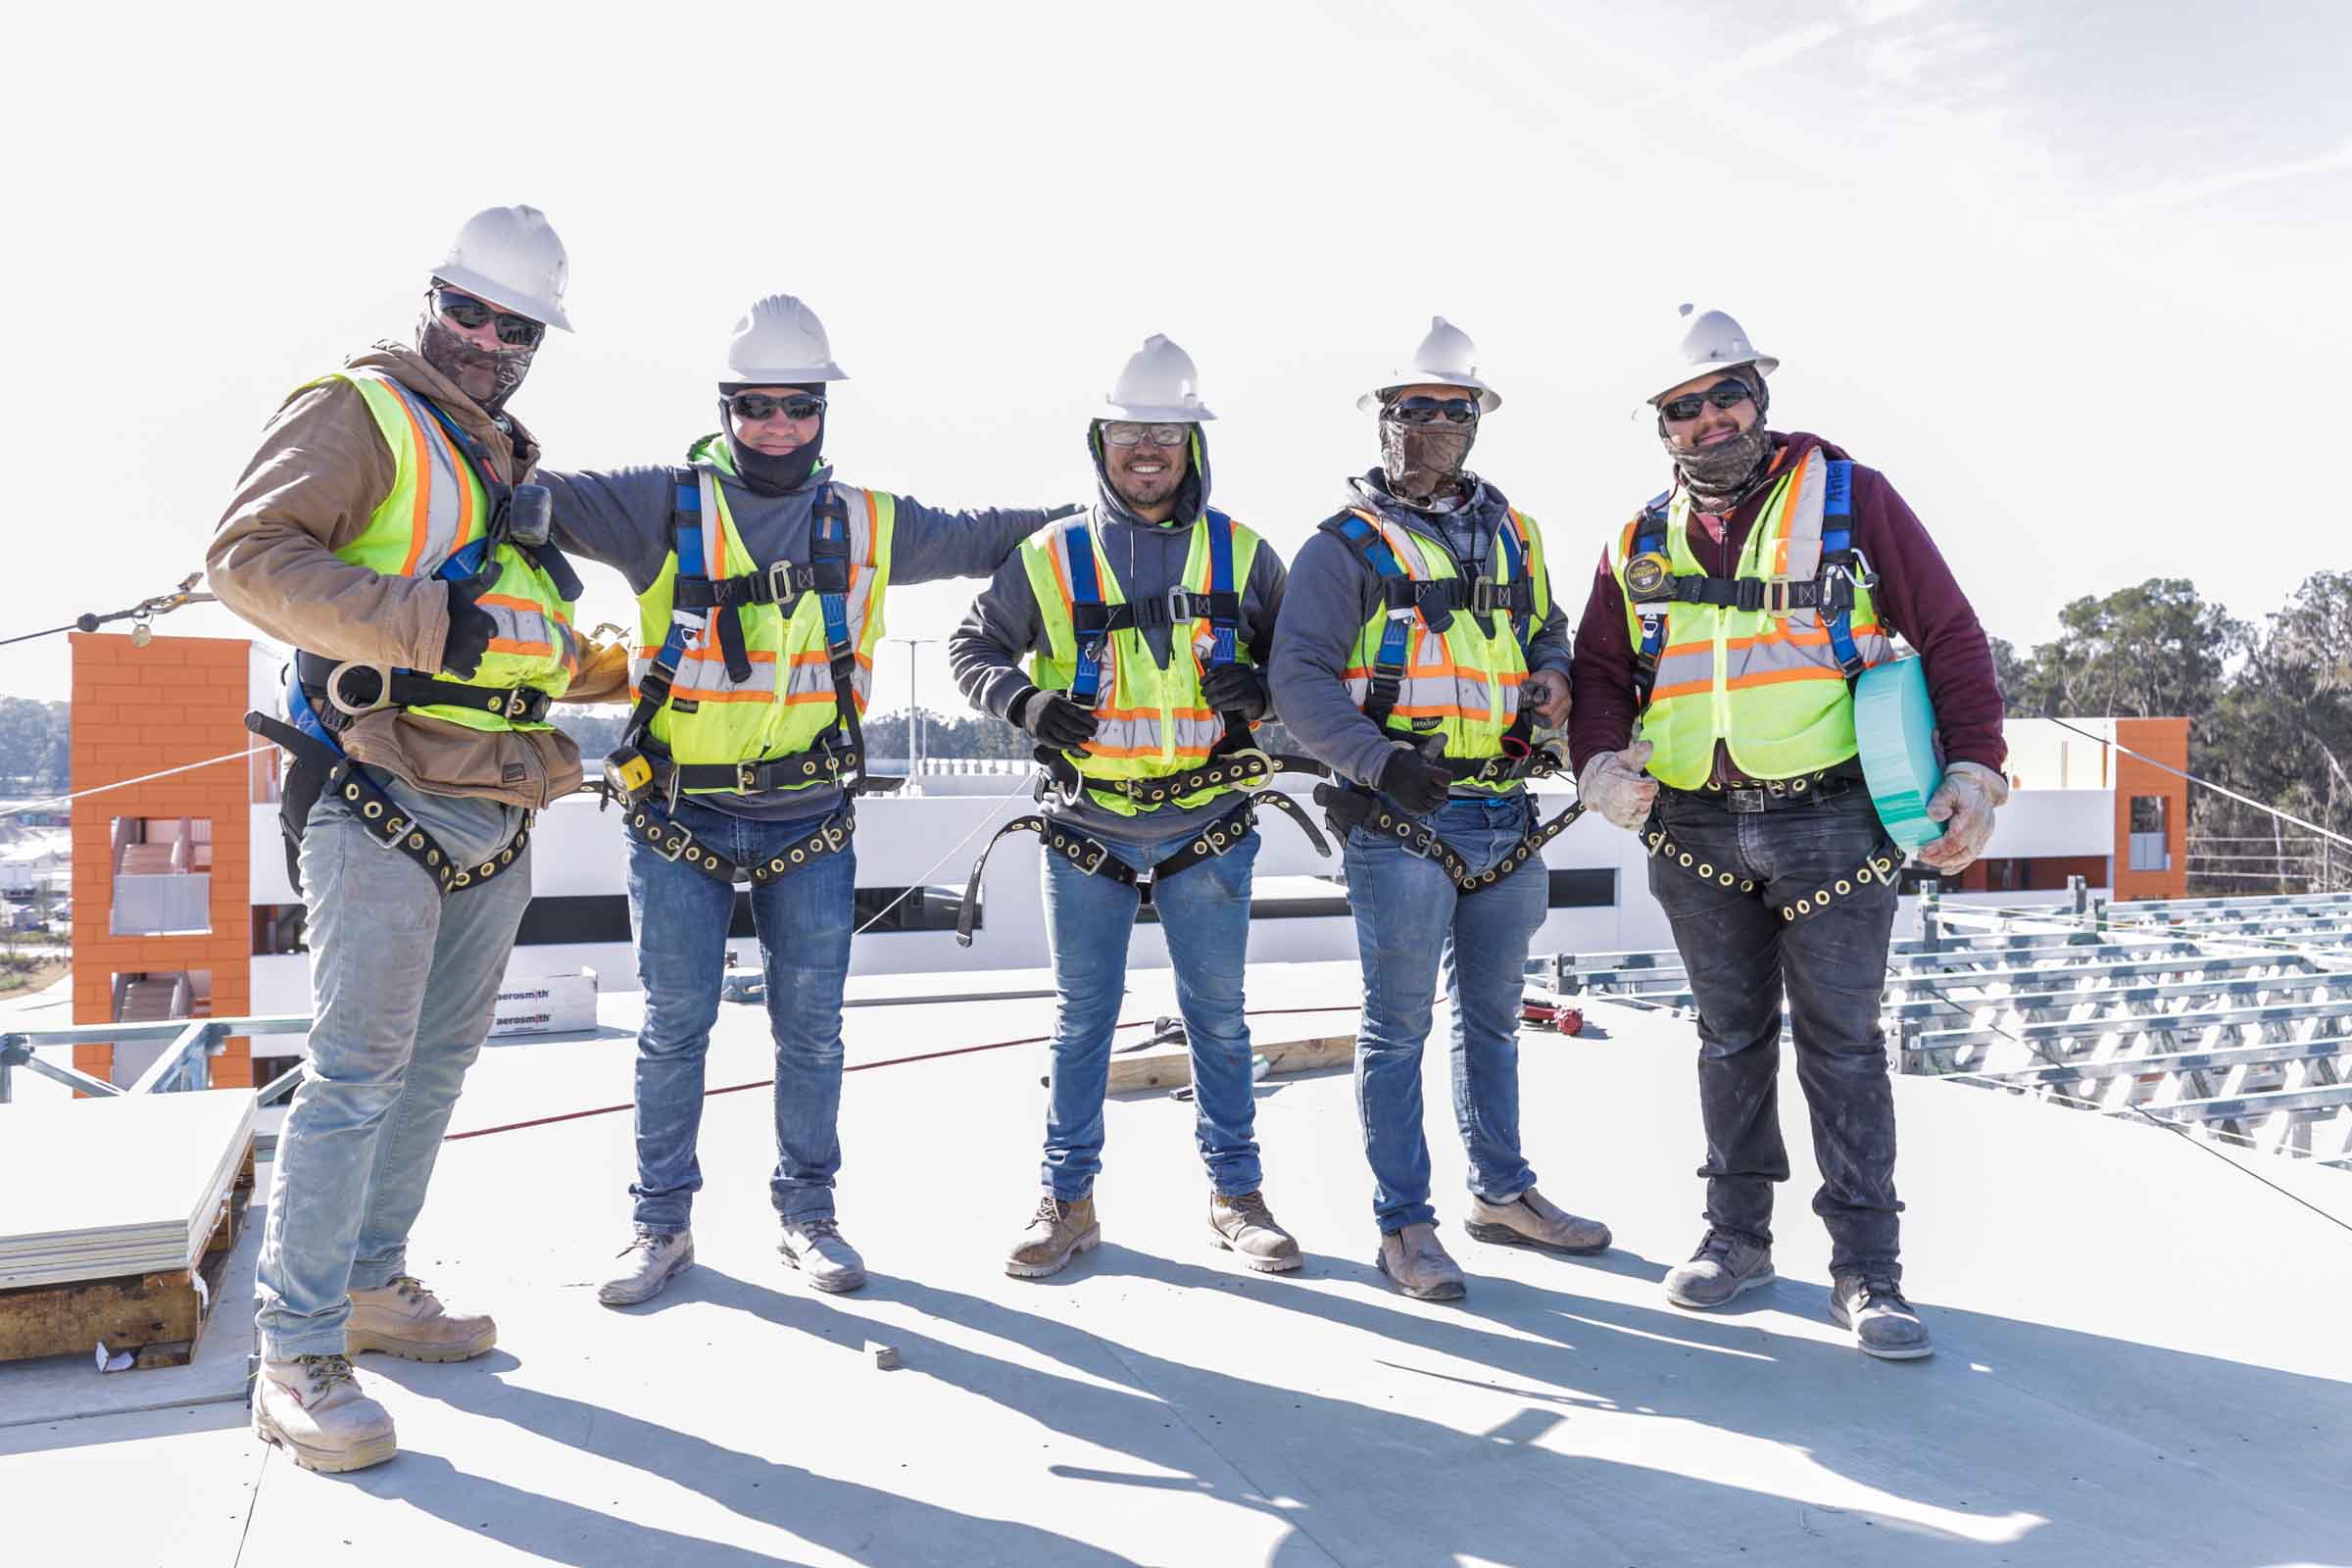 4 Ways to Make Your Jobsite the Place People Want to Work